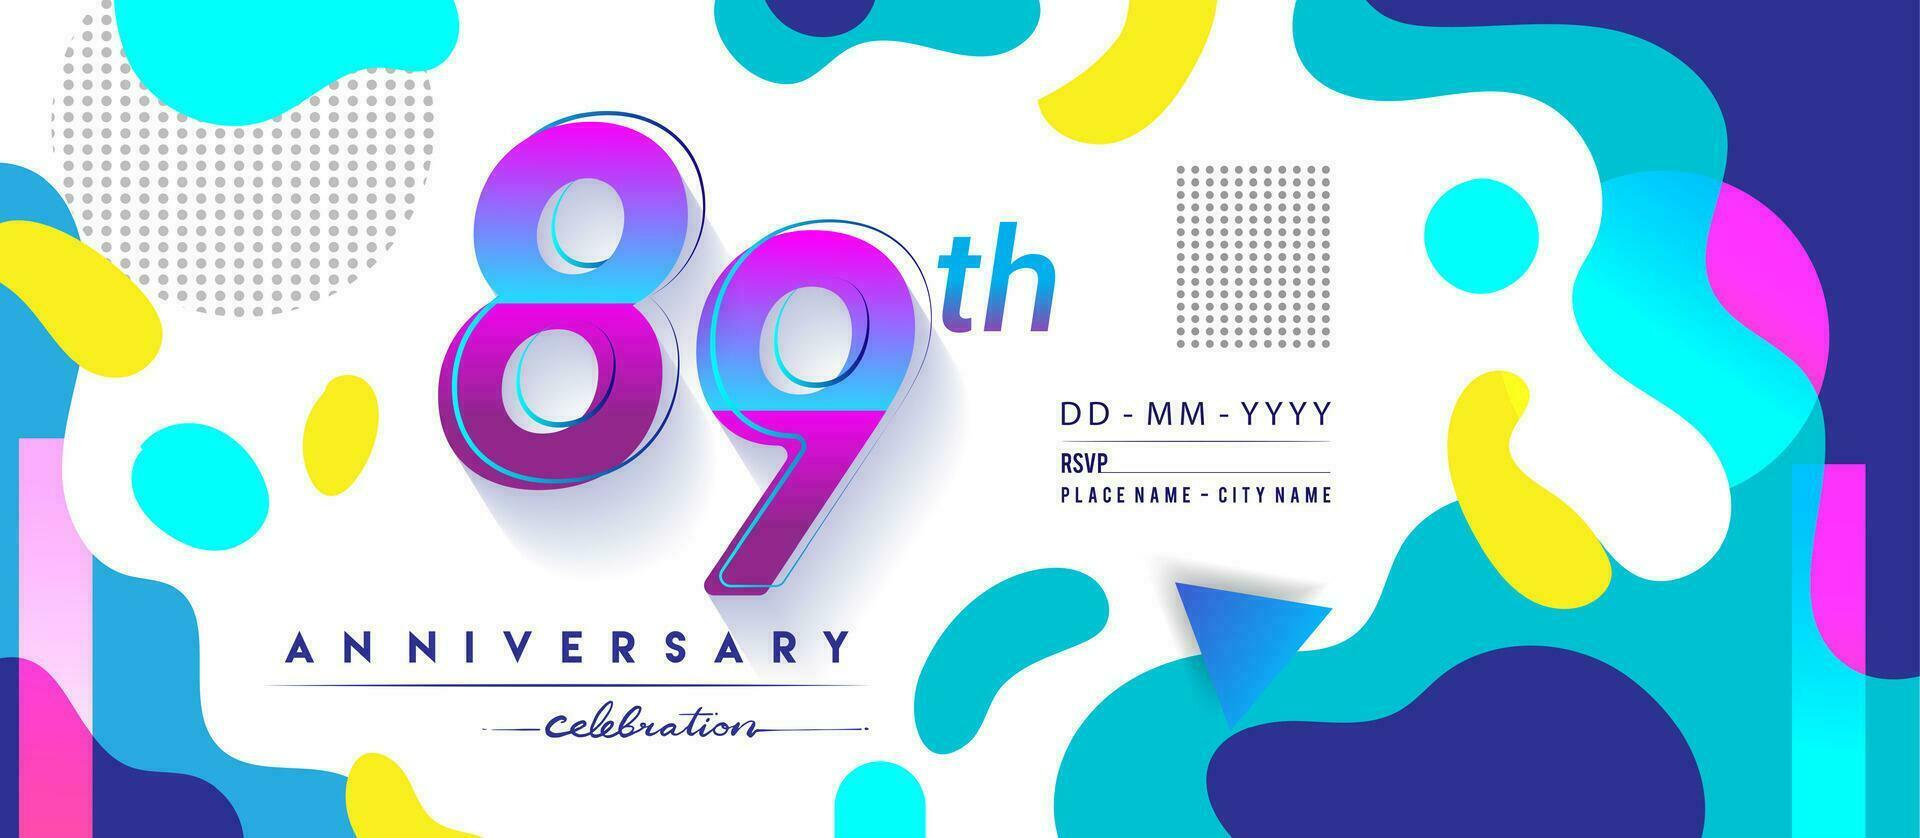 89th years anniversary logo, vector design birthday celebration with colorful geometric background and circles shape.